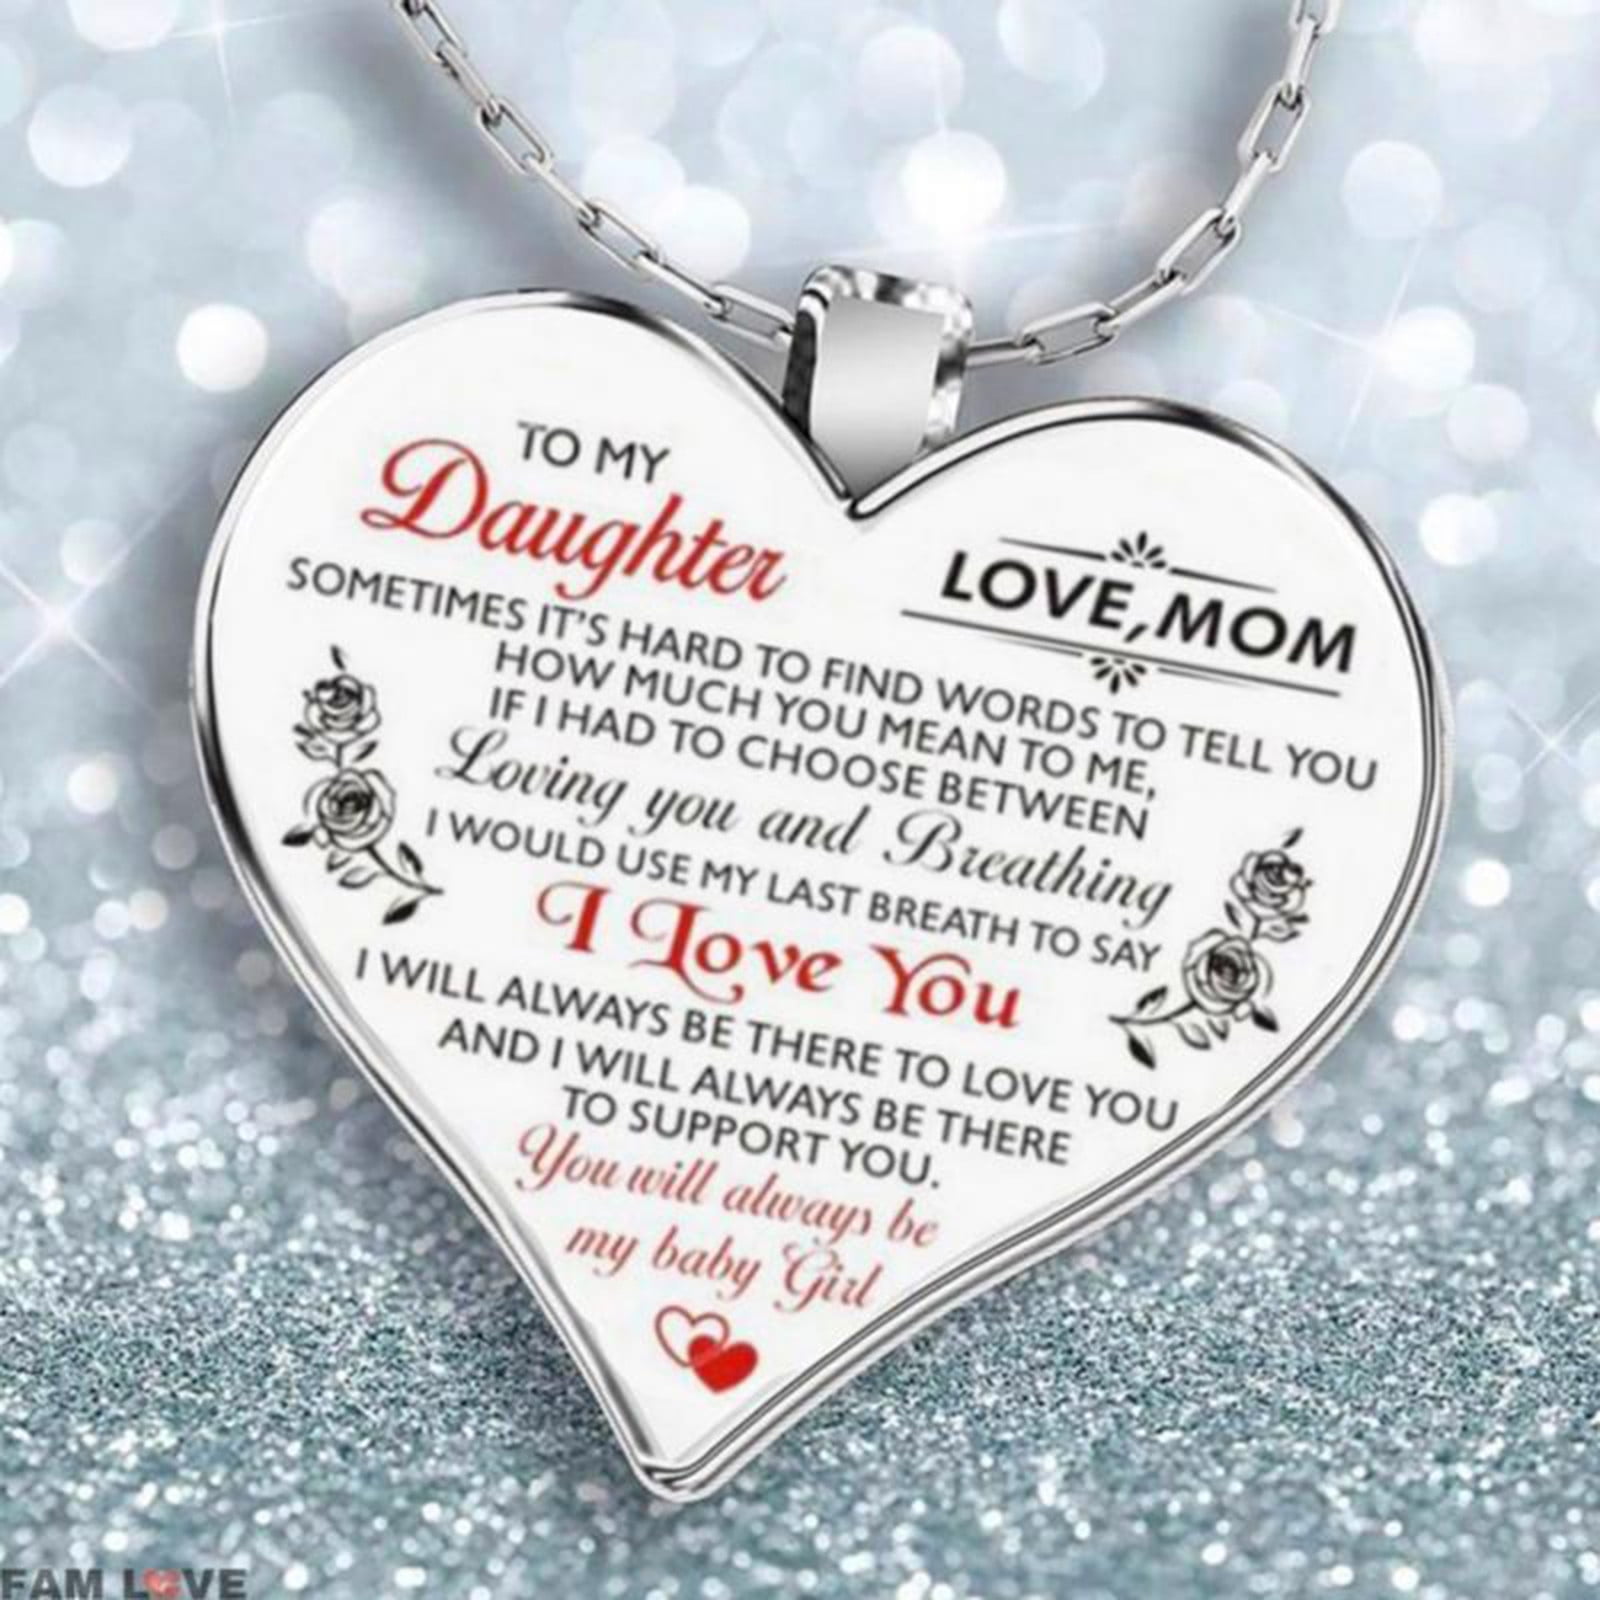 Personalized To my Daughter Necklace, valentines gifts for daughter, g –  ChipteeAmz